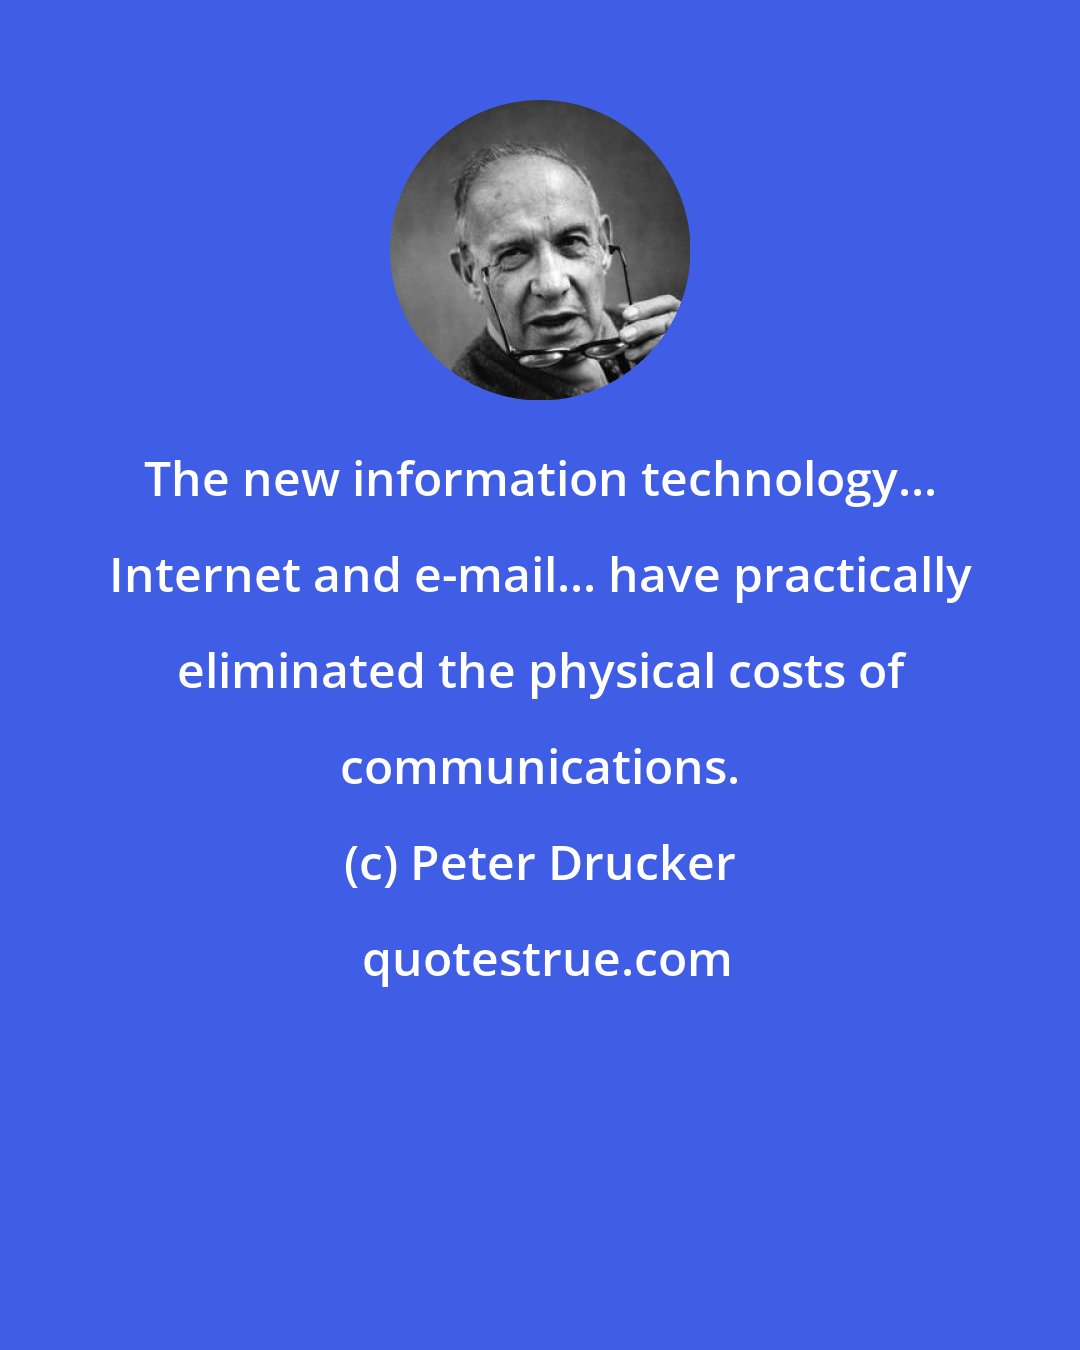 Peter Drucker: The new information technology... Internet and e-mail... have practically eliminated the physical costs of communications.